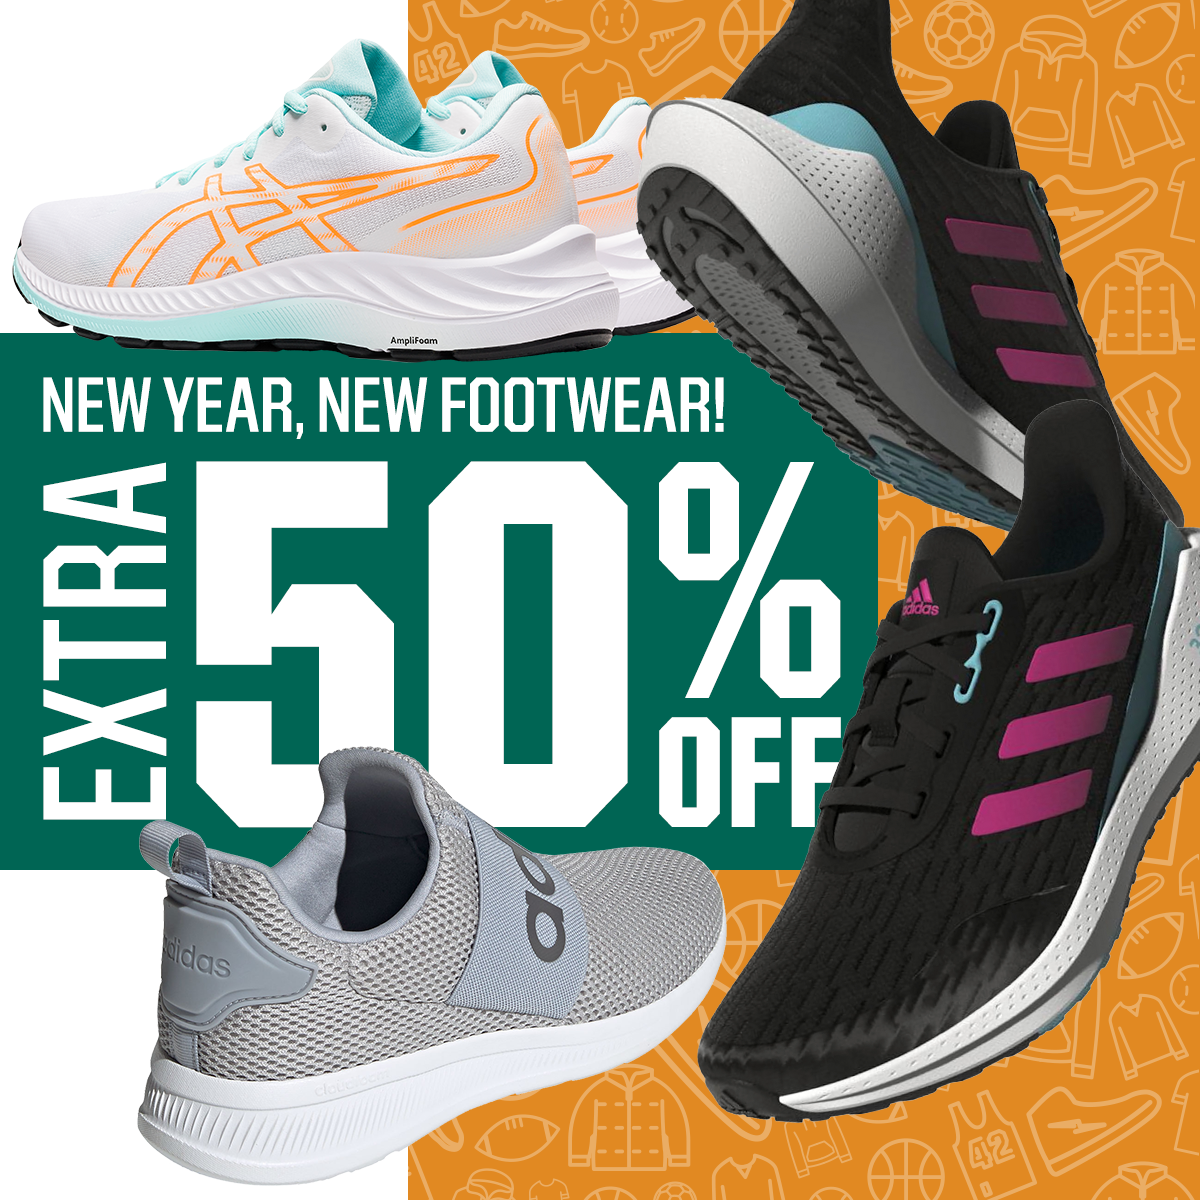 New year, new footwear! Extra 50% off.